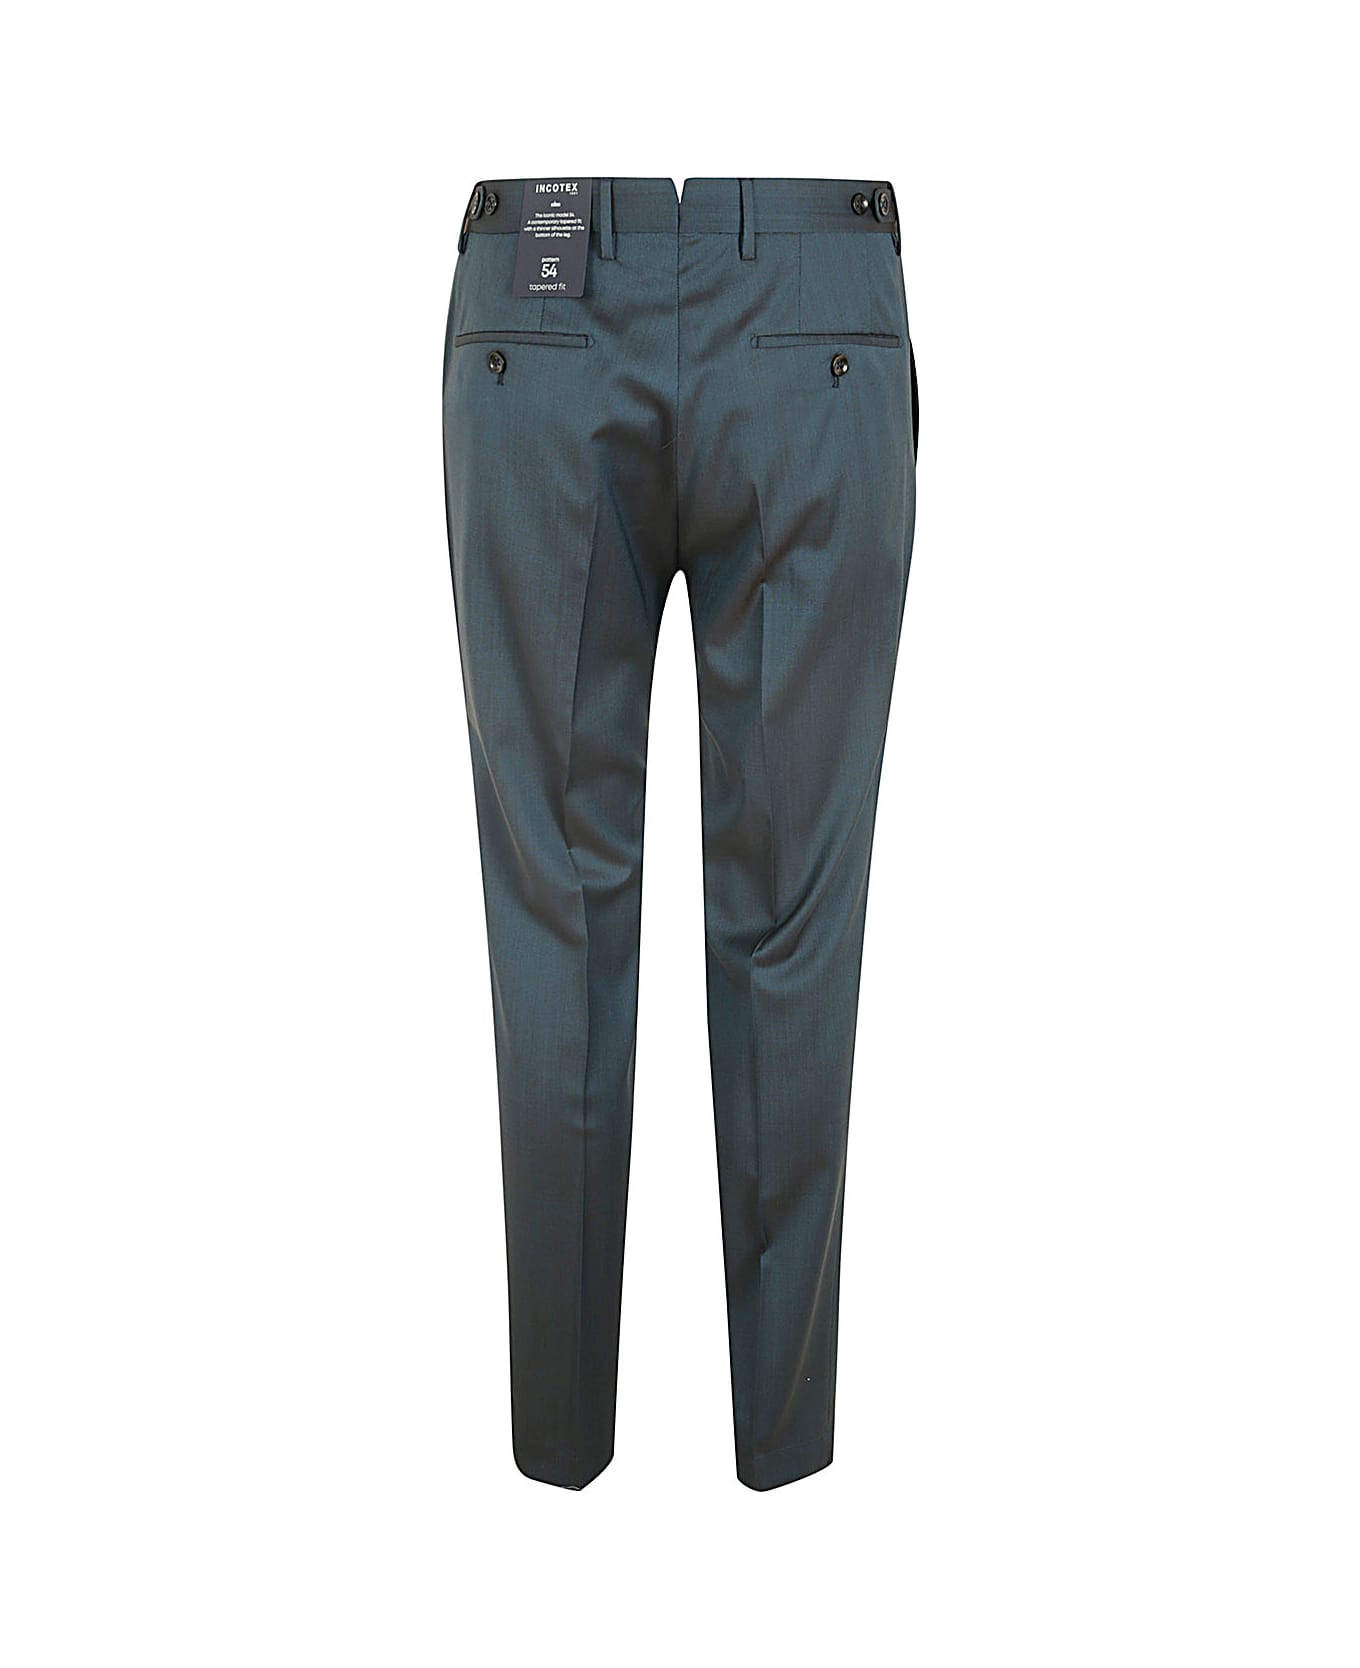 Incotex Model R54 Tapered Fit Trousers - Medium Blue ボトムス